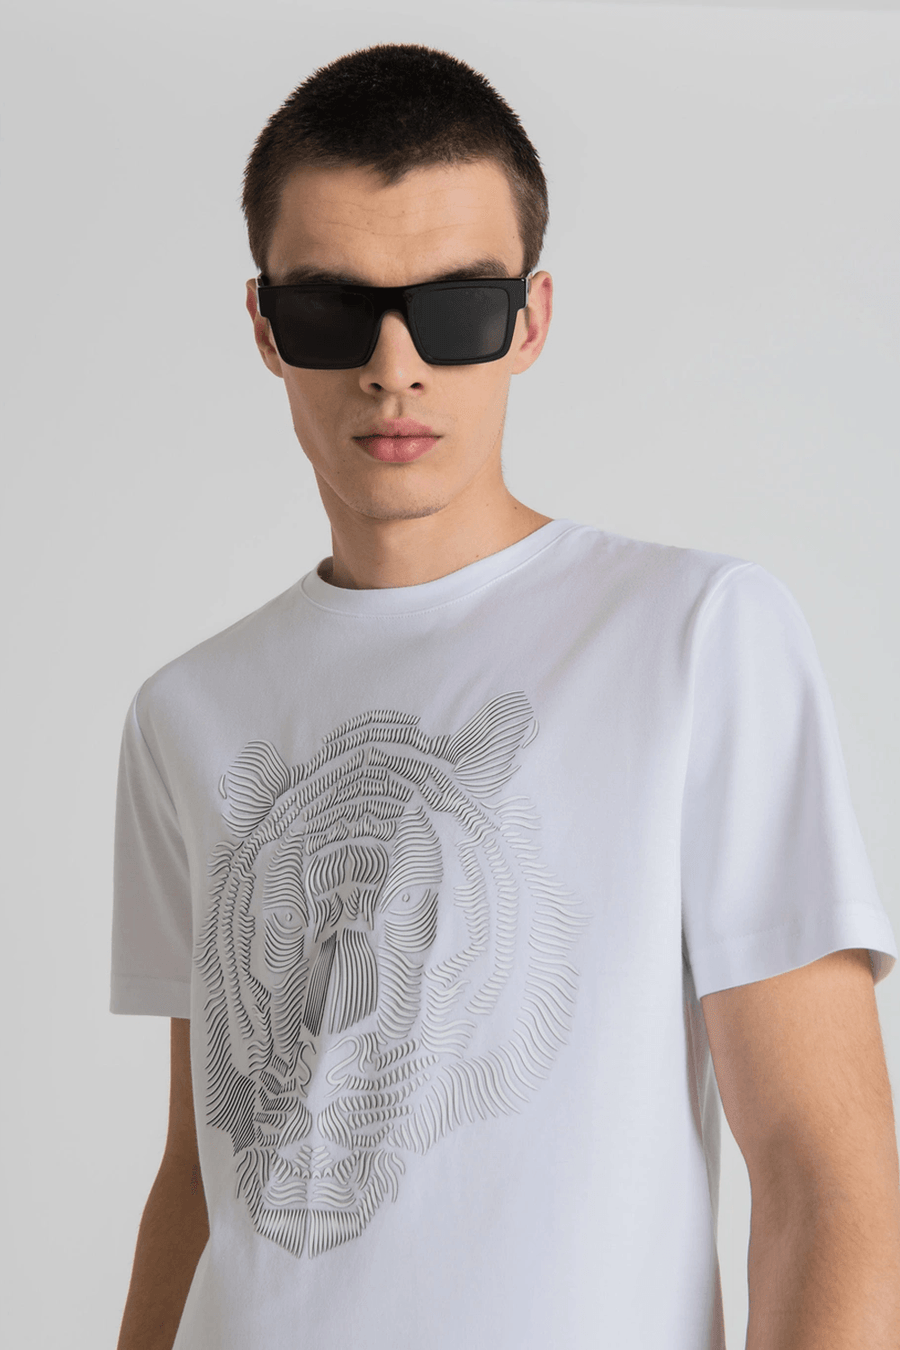 Buy the Antony Morato Slim Fit Tiger Print T-Shirt in White at Intro. Spend £50 for free UK delivery. Official stockists. We ship worldwide.